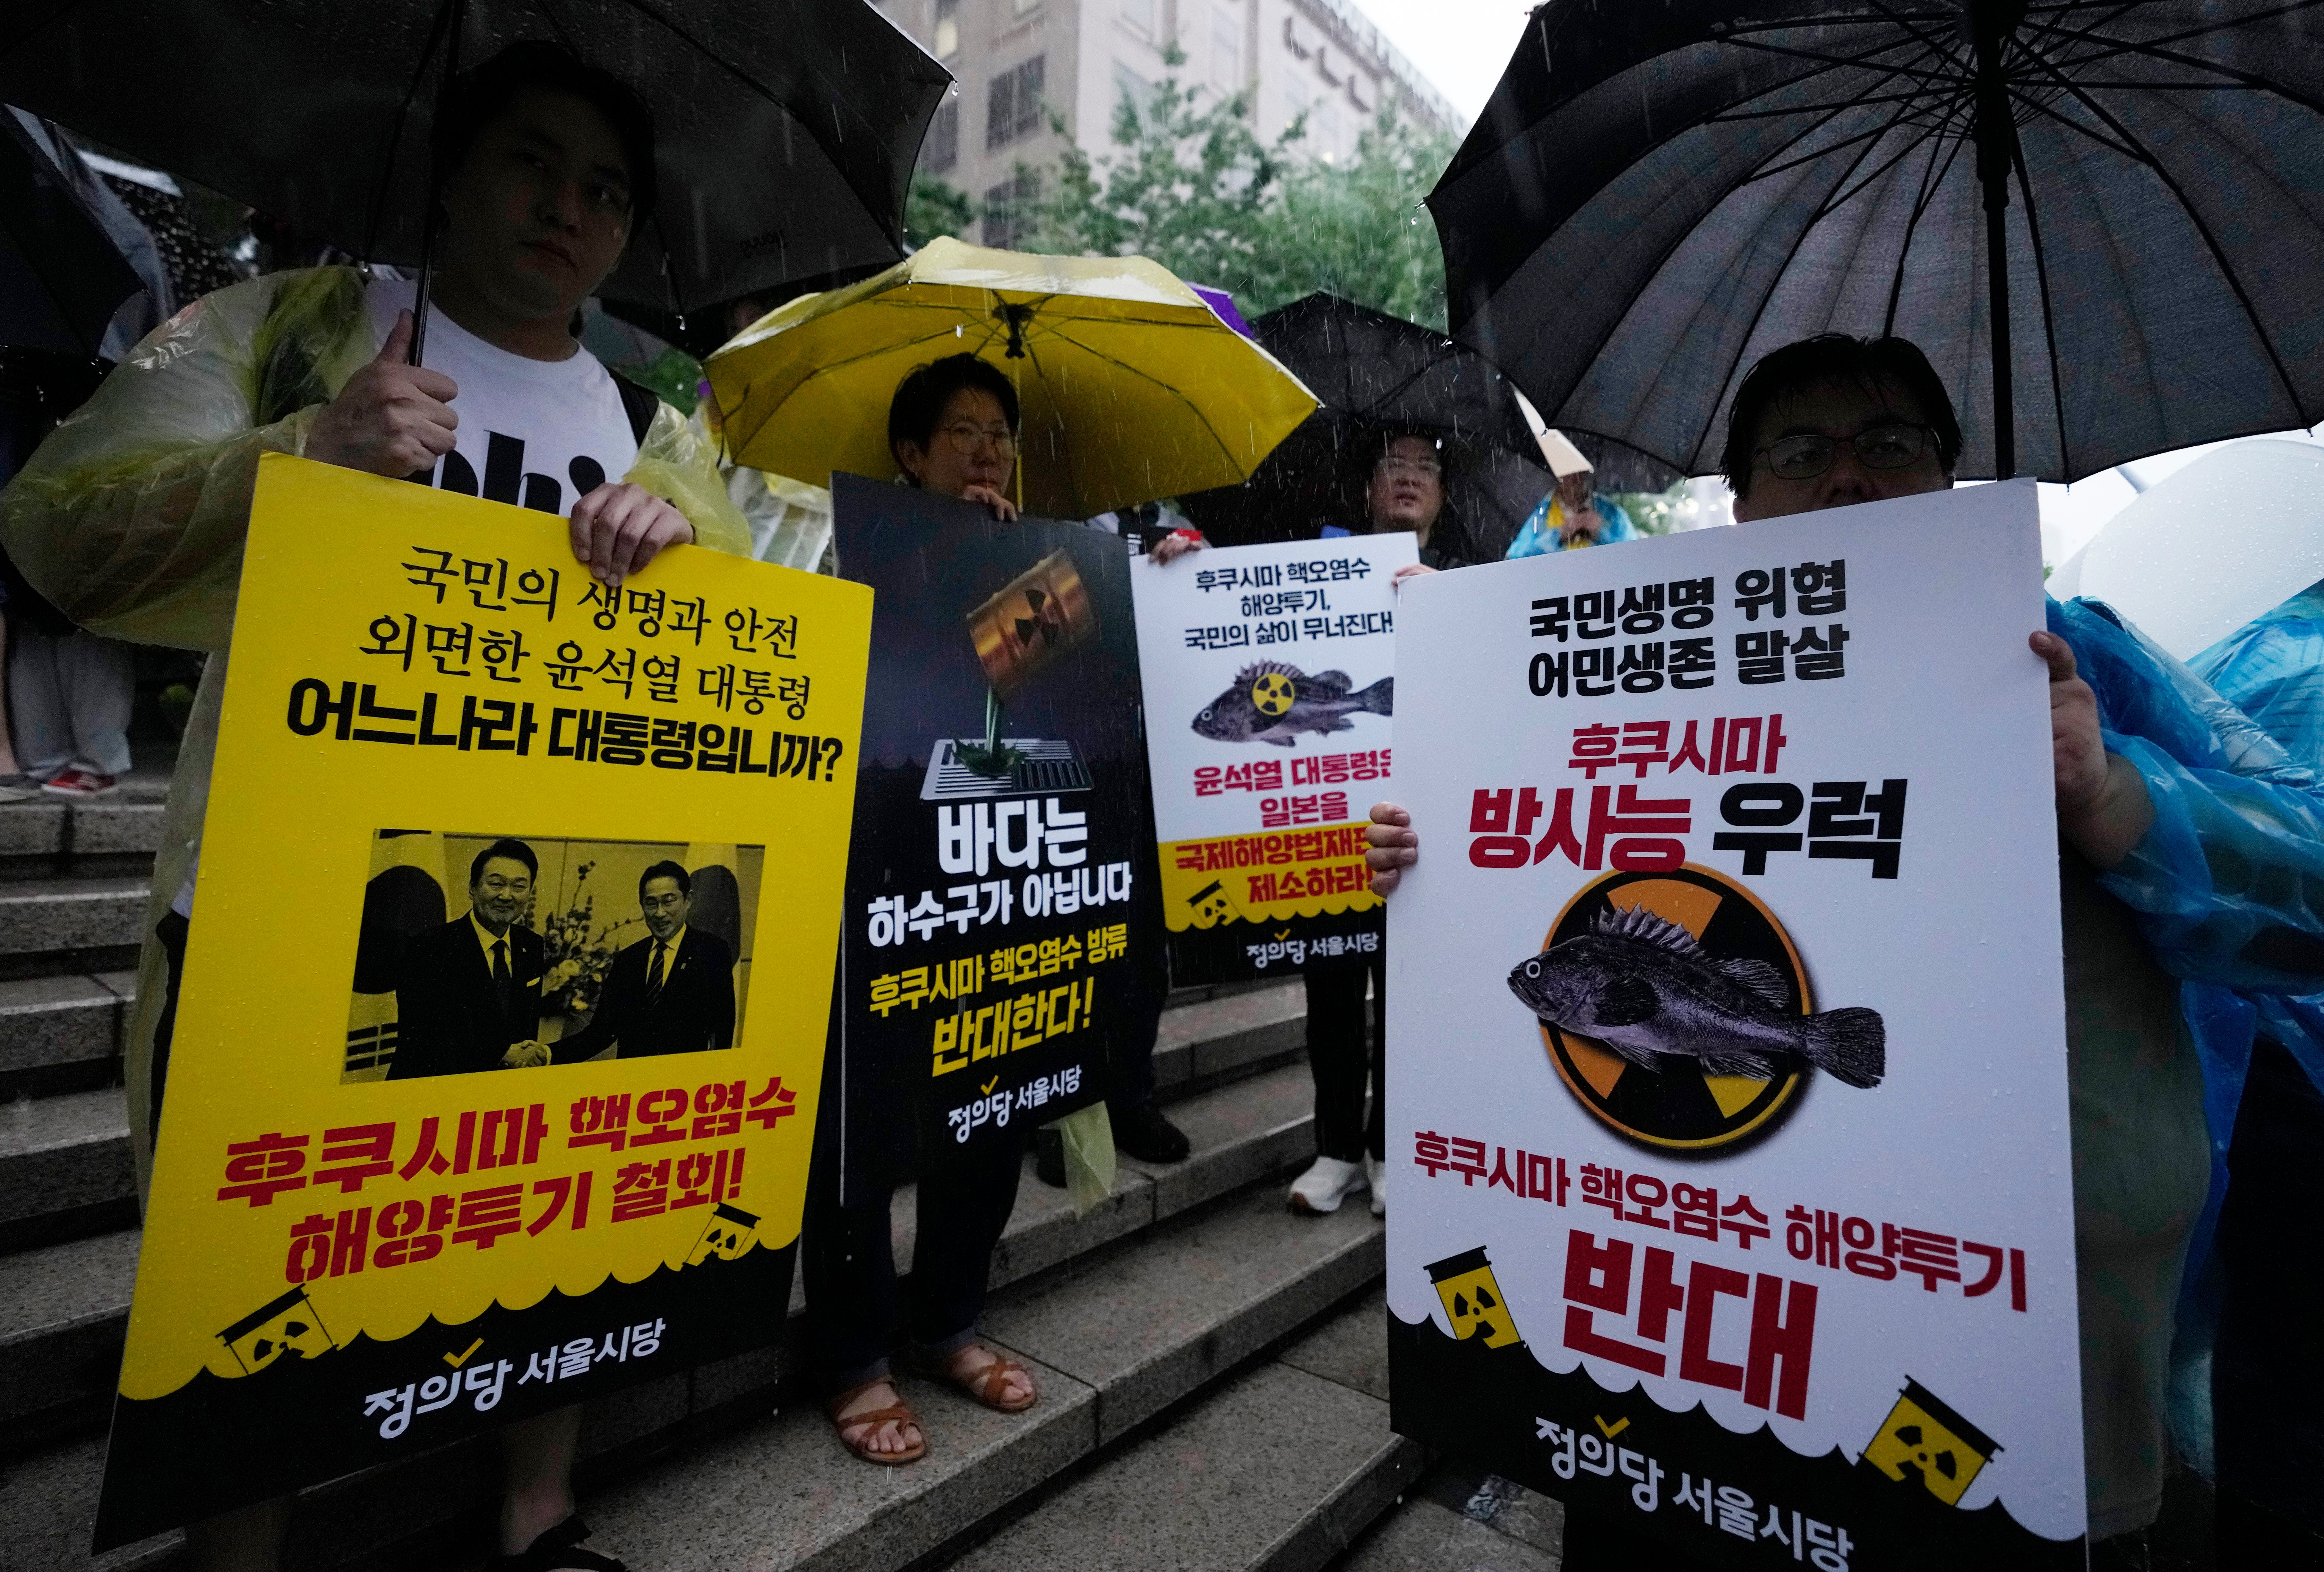 Protesters attend a rally against the Japanese government’s decision to release treated radioactive wastewater from the Fukushima nuclear power plant, in Seoul